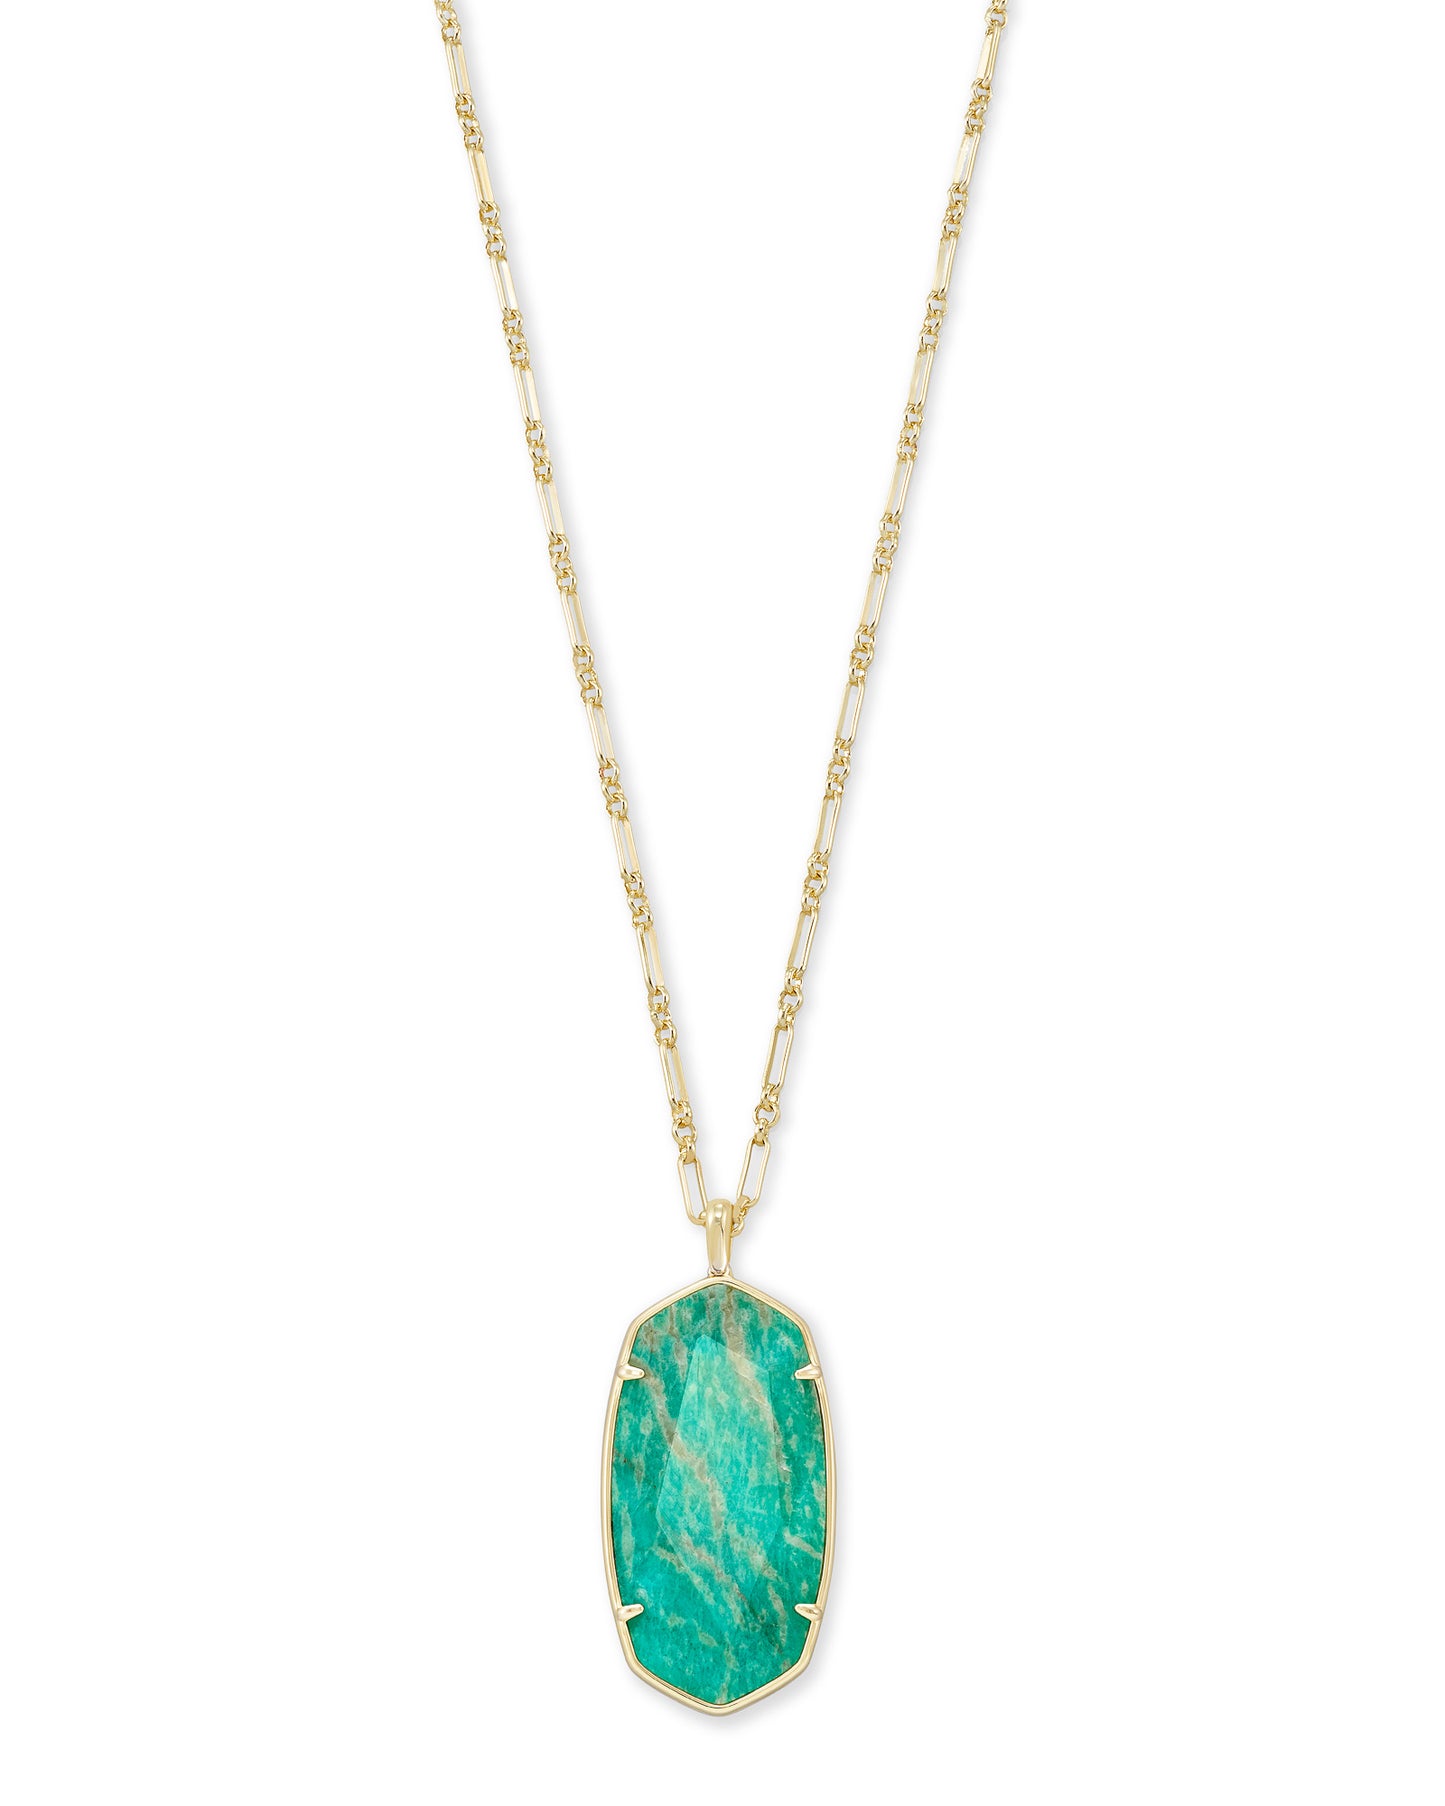 Kendra Scott Faceted Reid Long Necklace - Available in 3 Colors